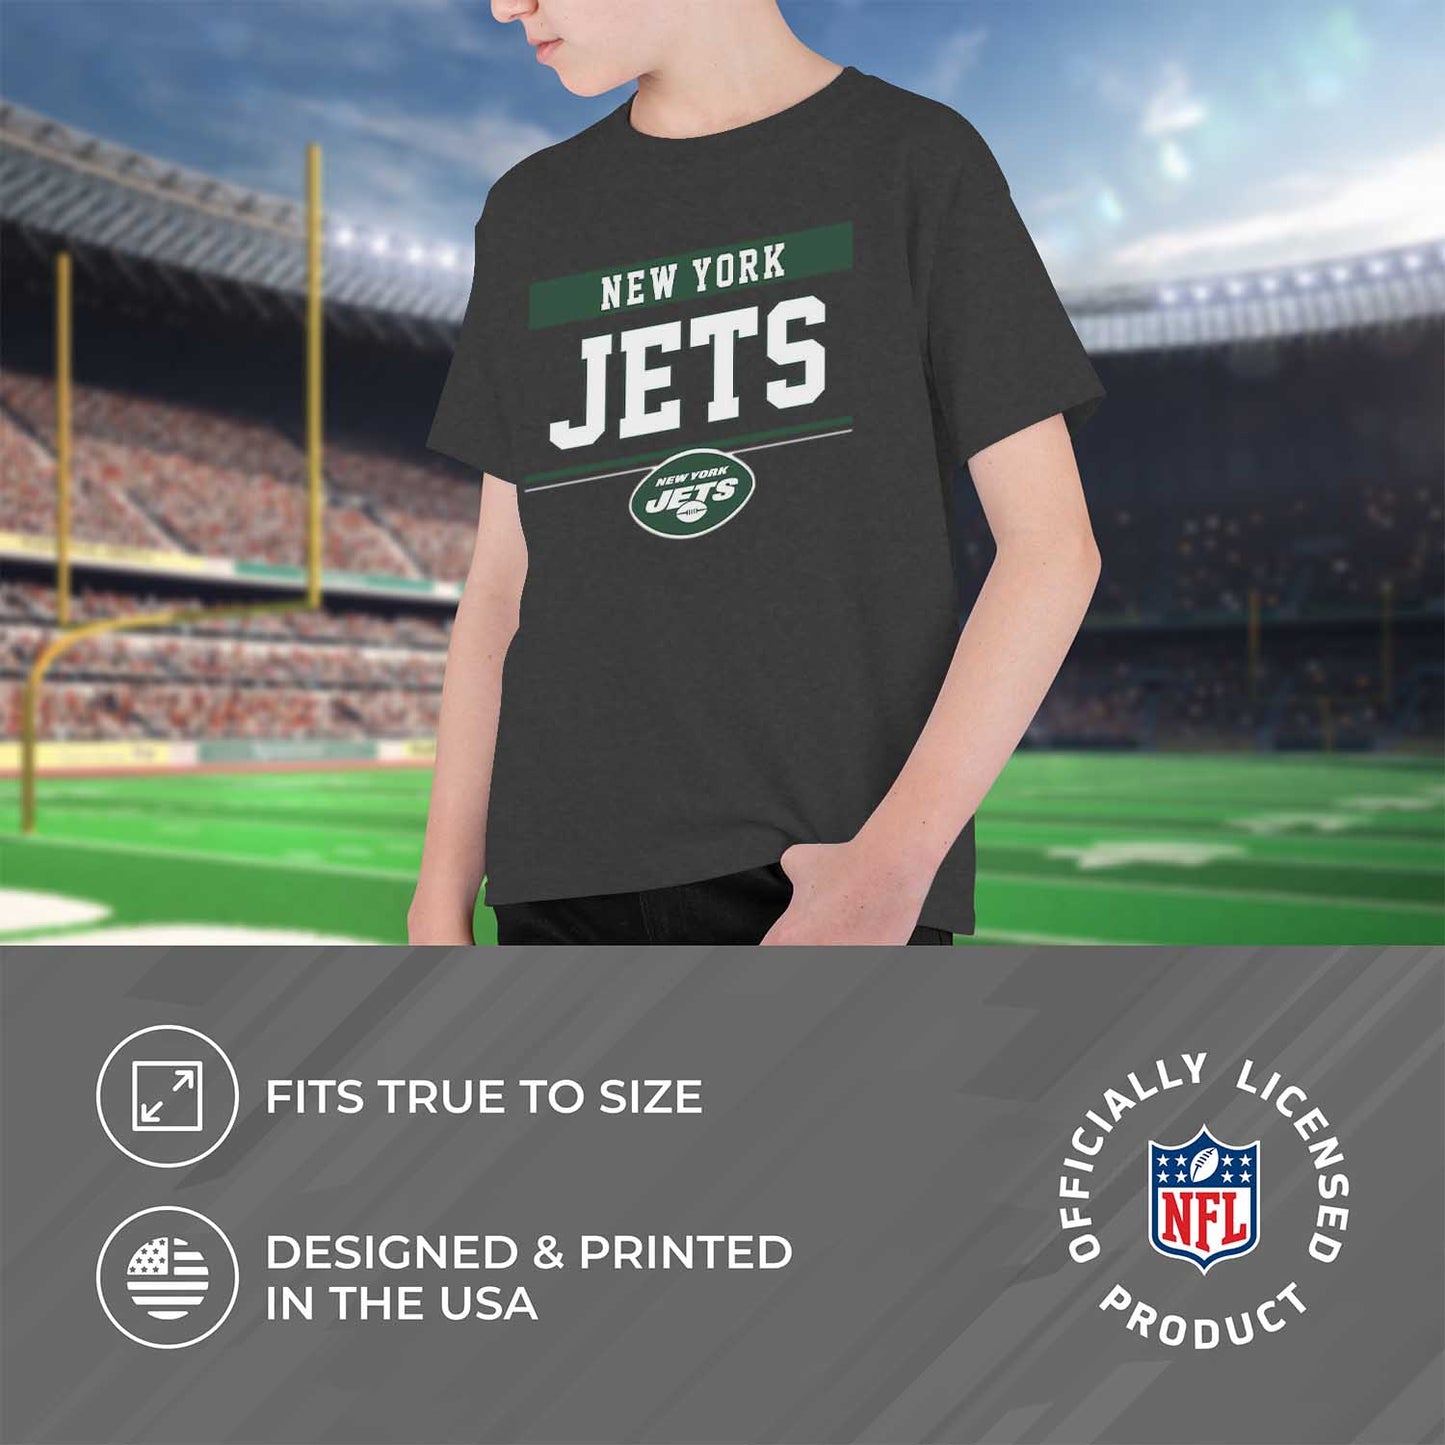 New York Jets NFL Youth Short Sleeve Charcoal T Shirt - Charcoal